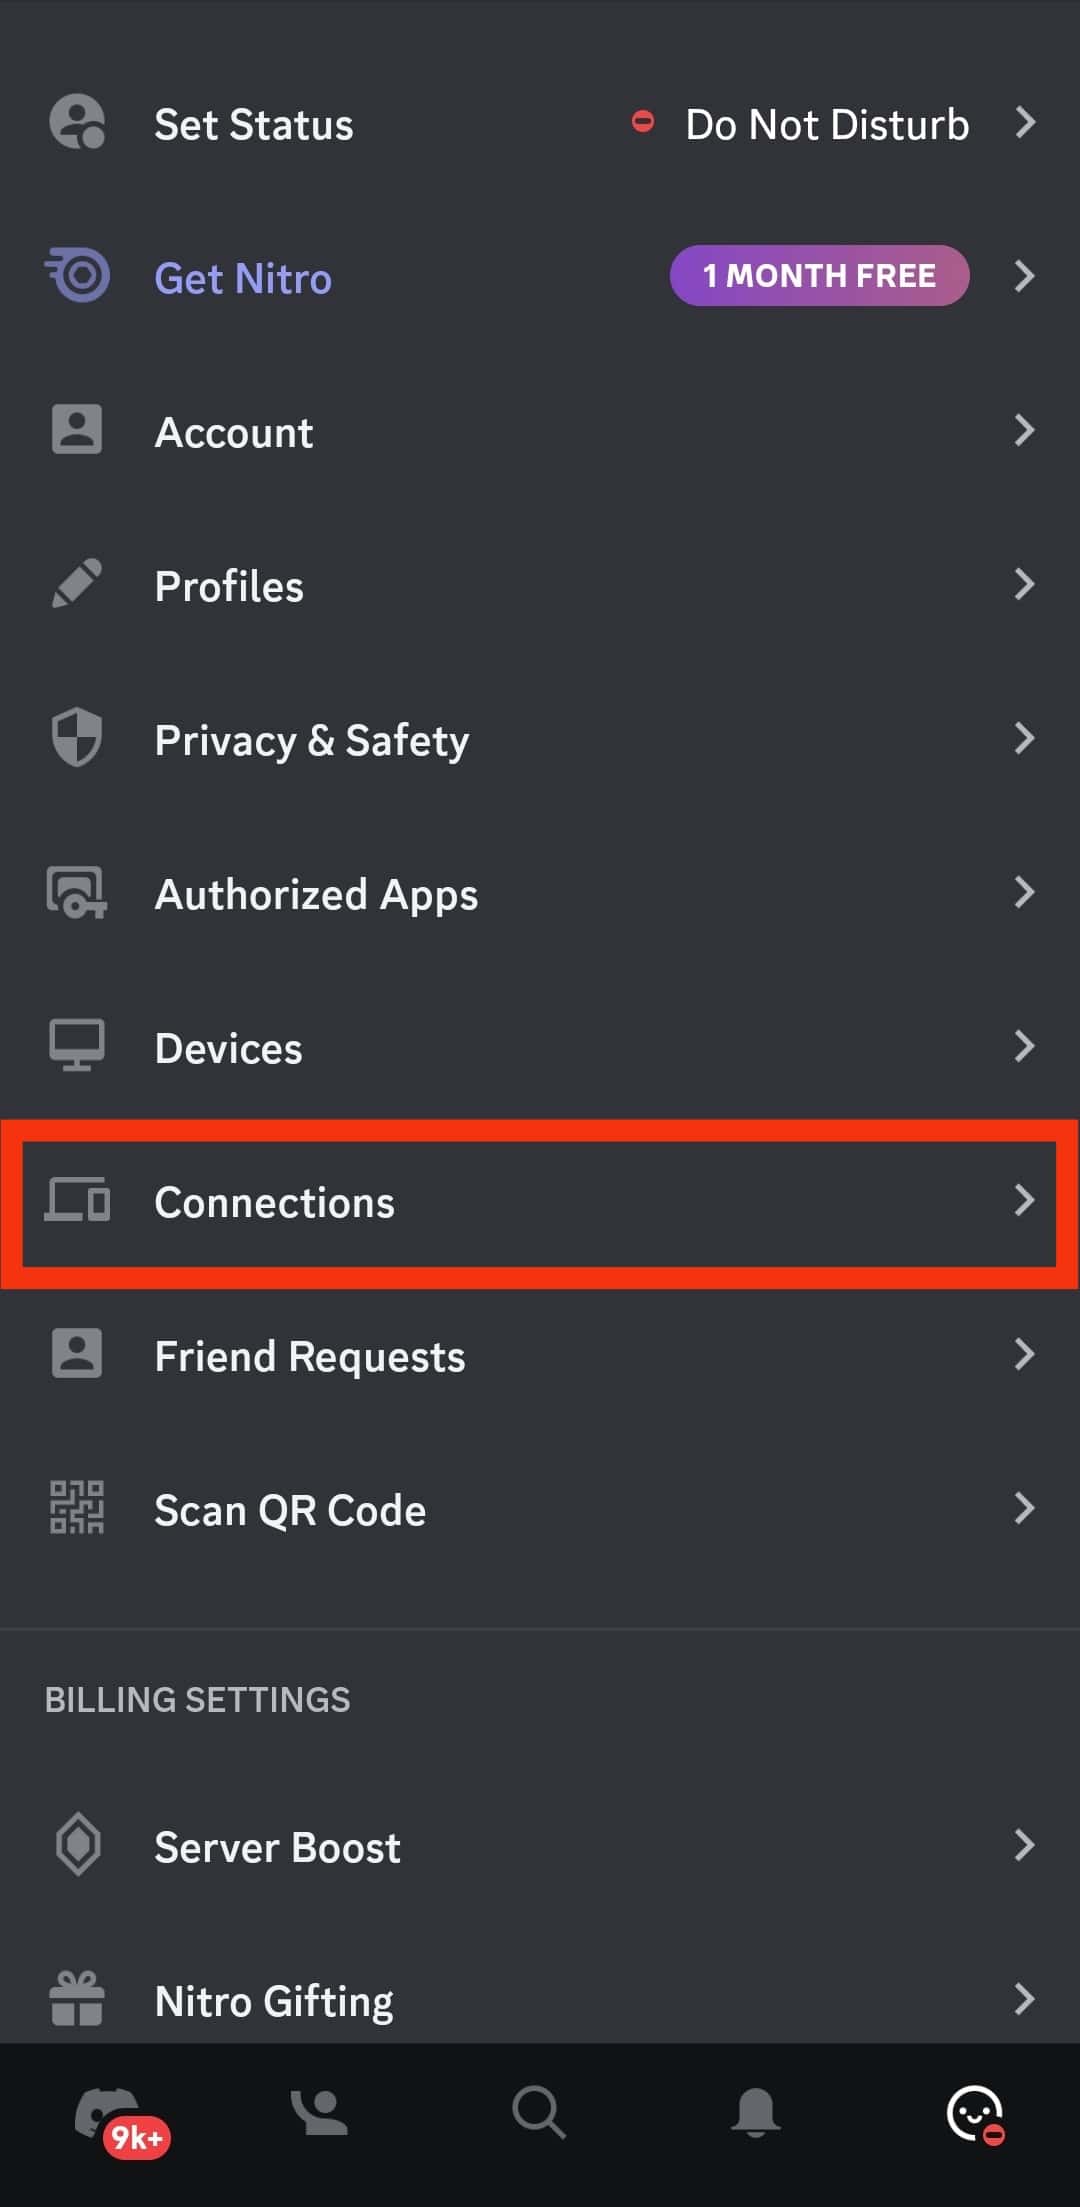 Tap The Connections Option